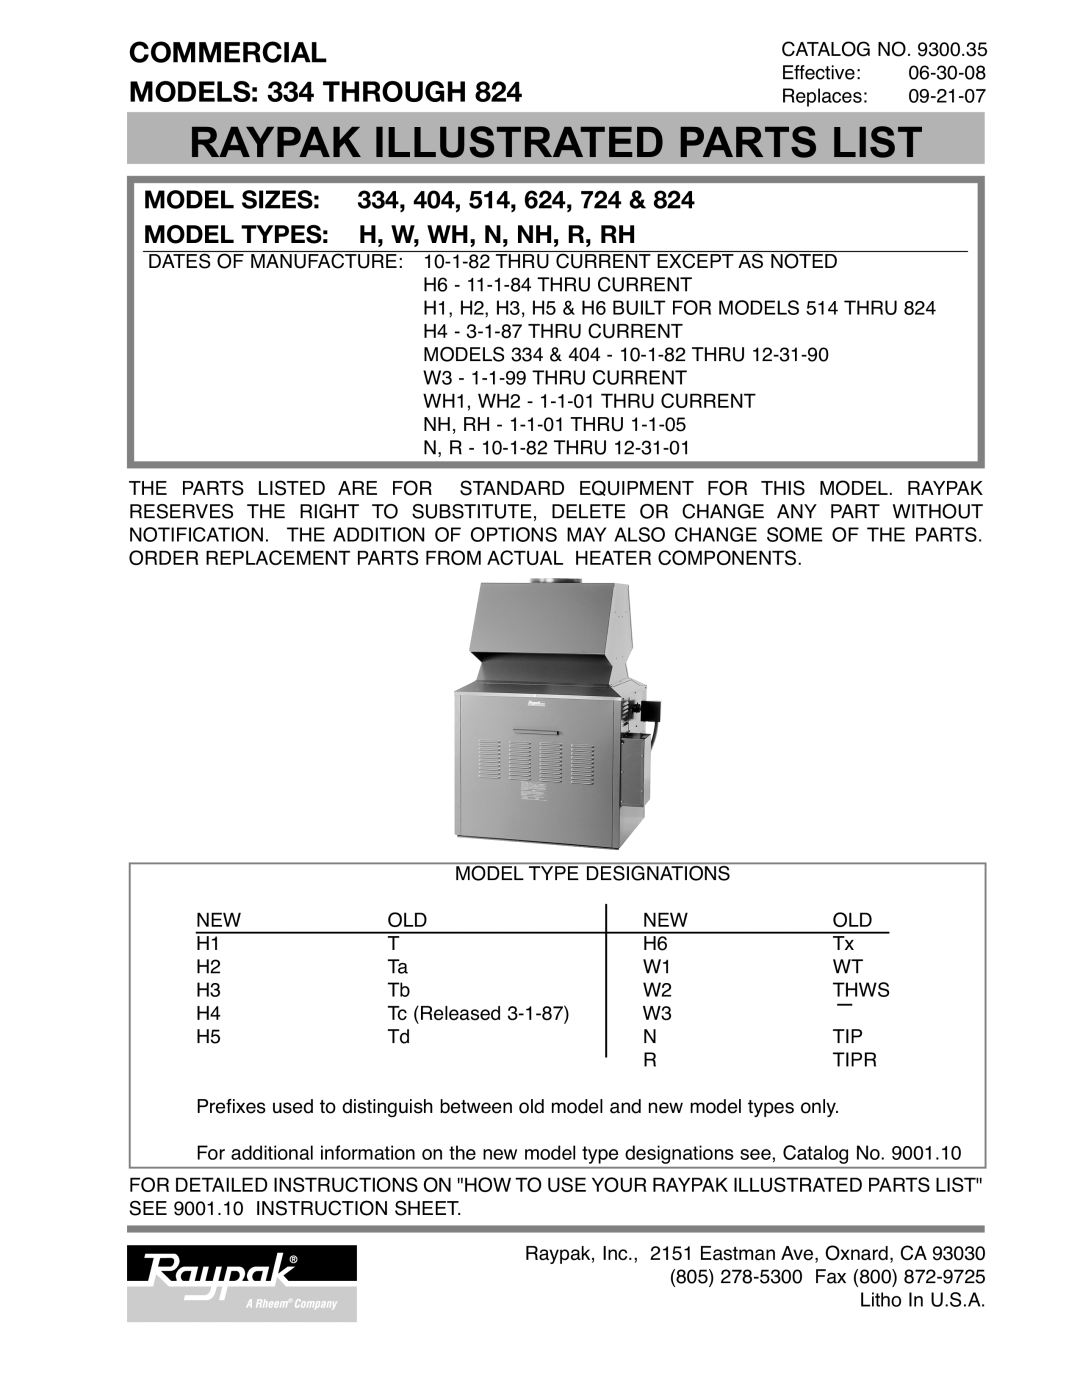 Raypak 404 instruction sheet Raypak Illustrated Parts List, COMMERCIAL MODELS 334 THROUGH 